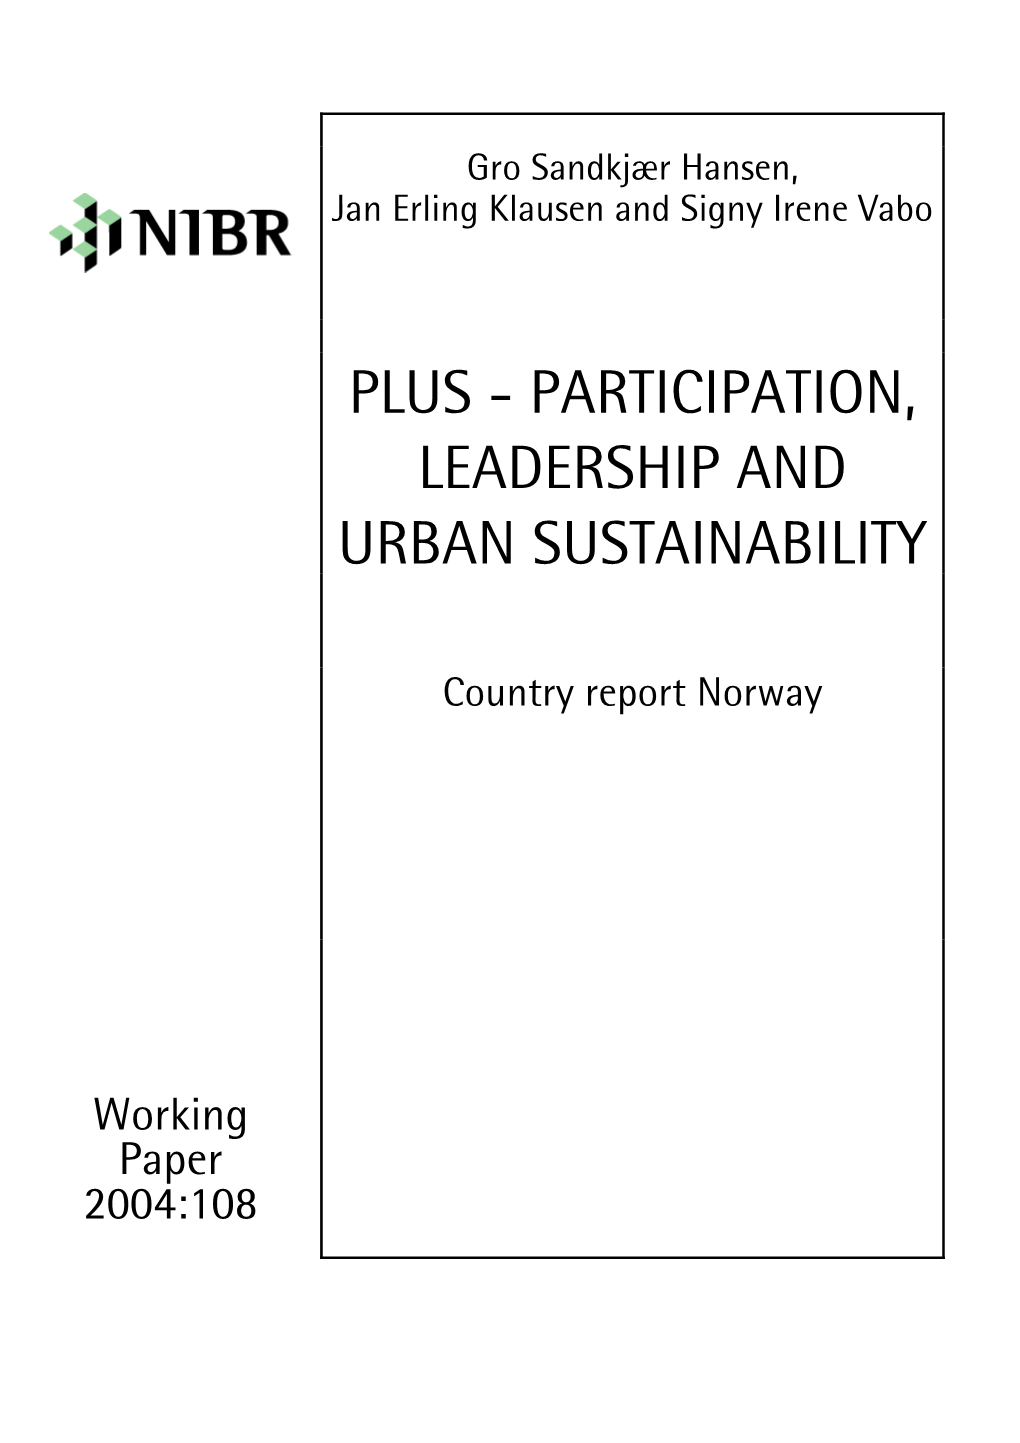 Plus - Participation, Leadership and Urban Sustainability